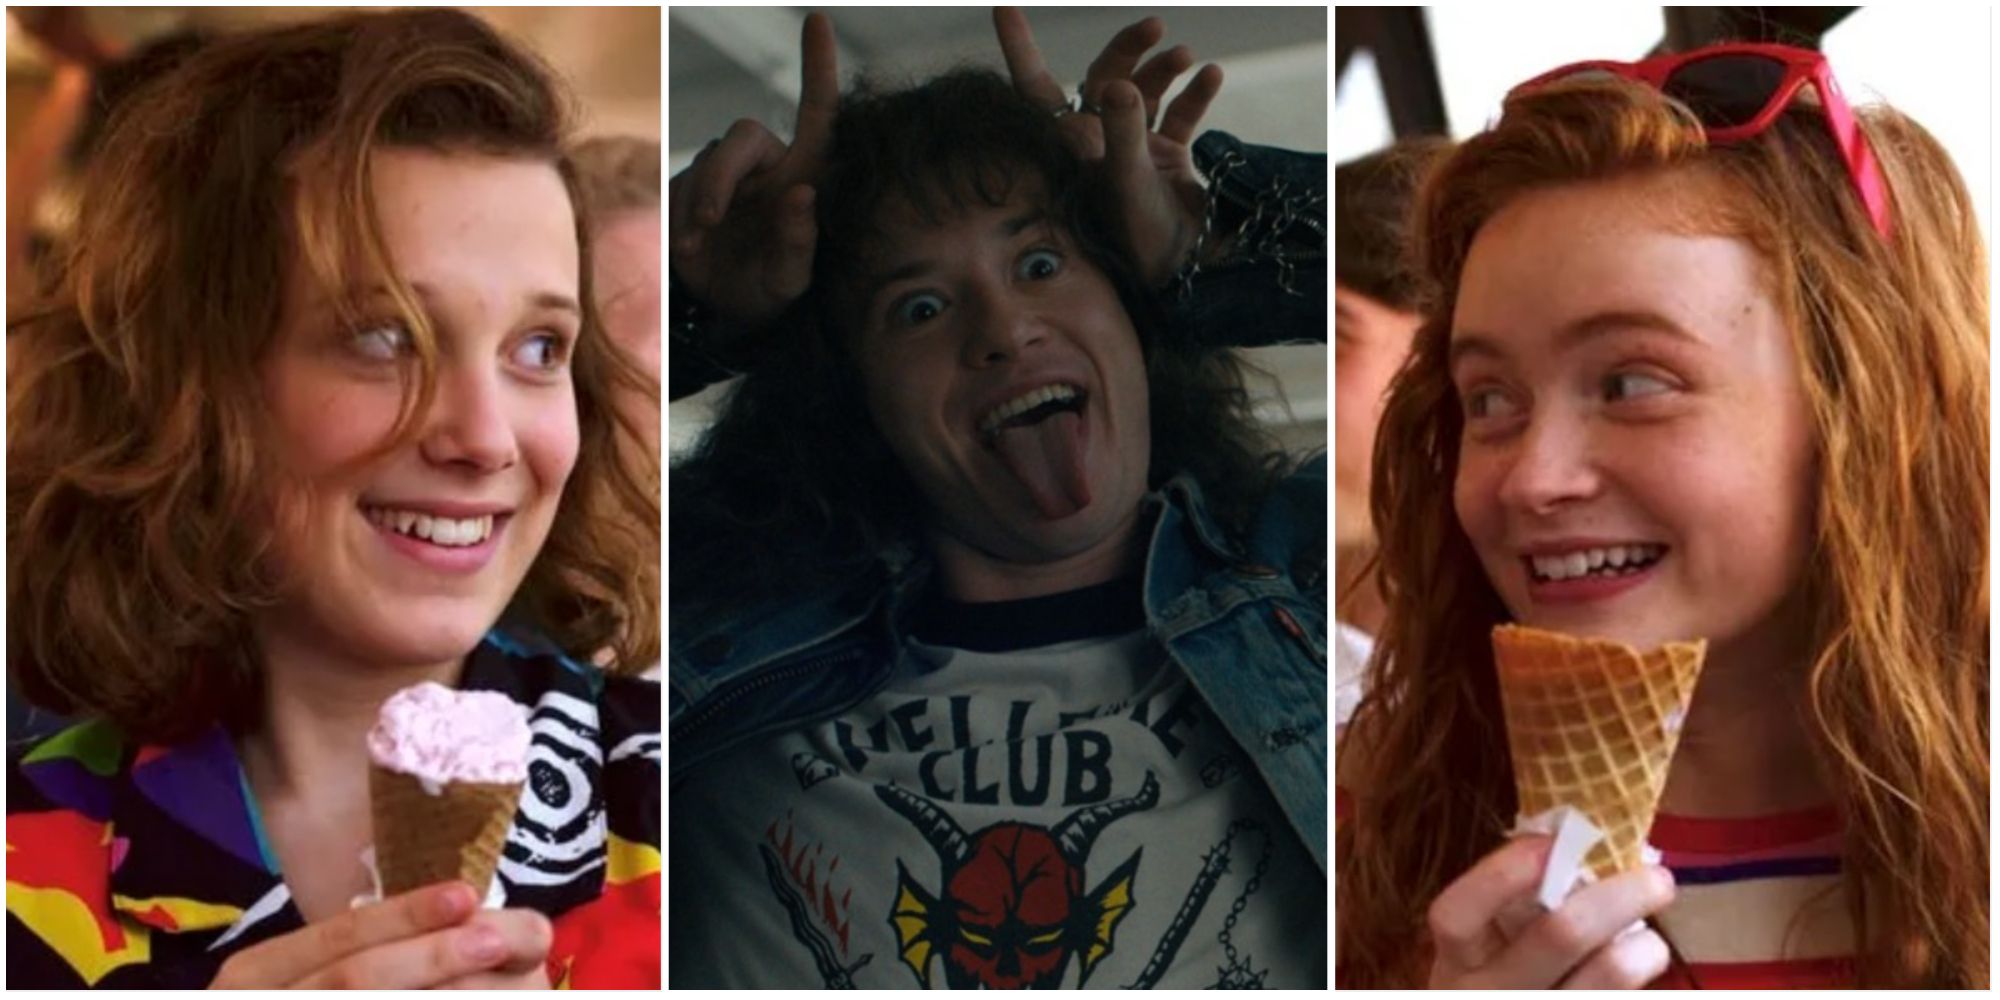 Stranger Things IMDb: Top 10 episodes ranked according to their rating